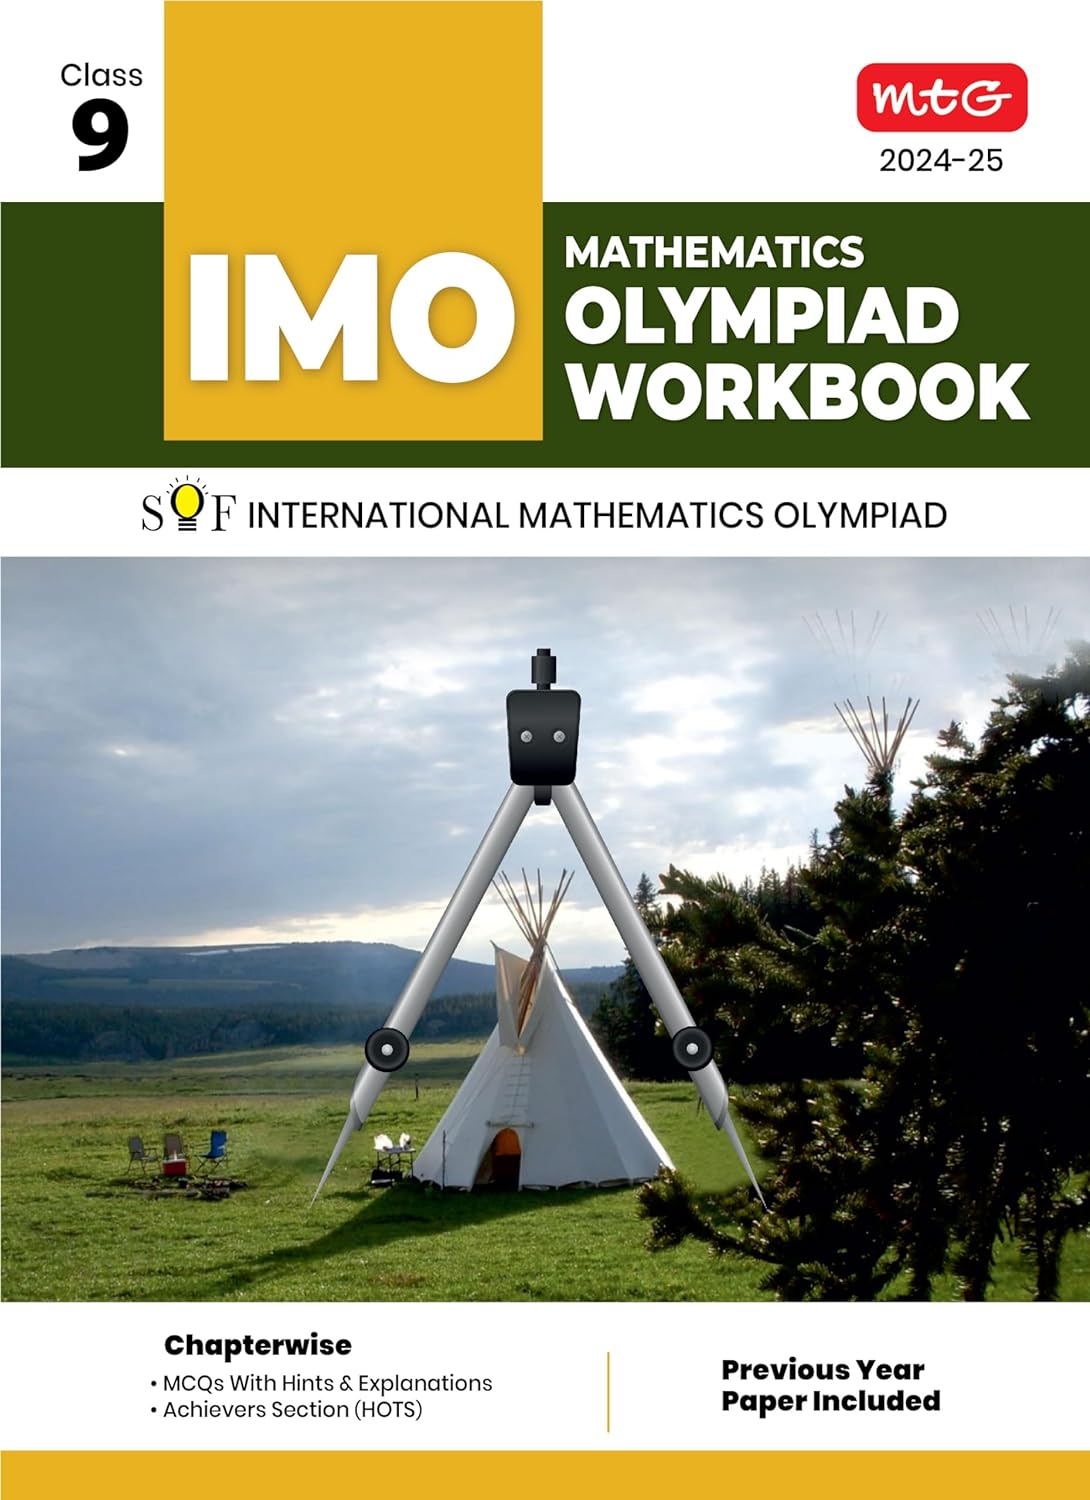 MTG Olympiad IMO Mathematics Workbook For Class 9 - Latest for 2024-25 Session